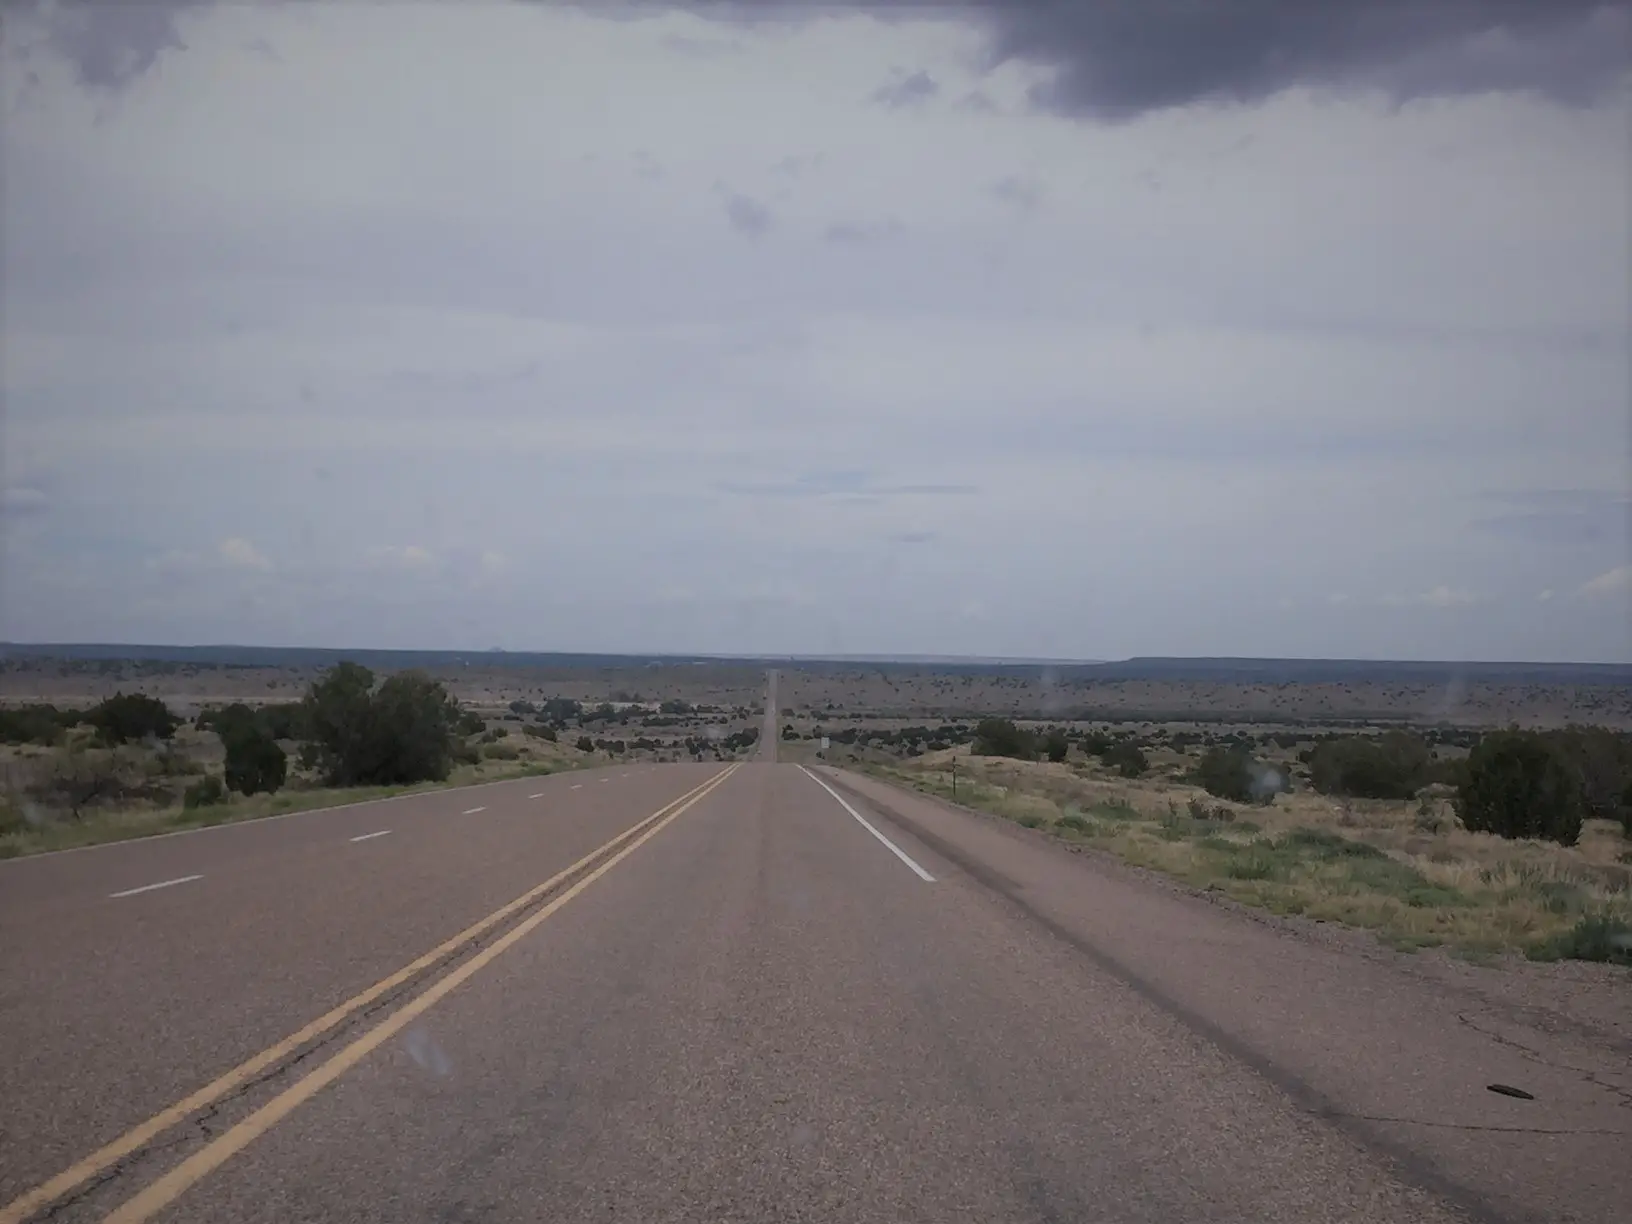 A two-lane, paved road stretches to the horizon amidst desolate, desert scrubland